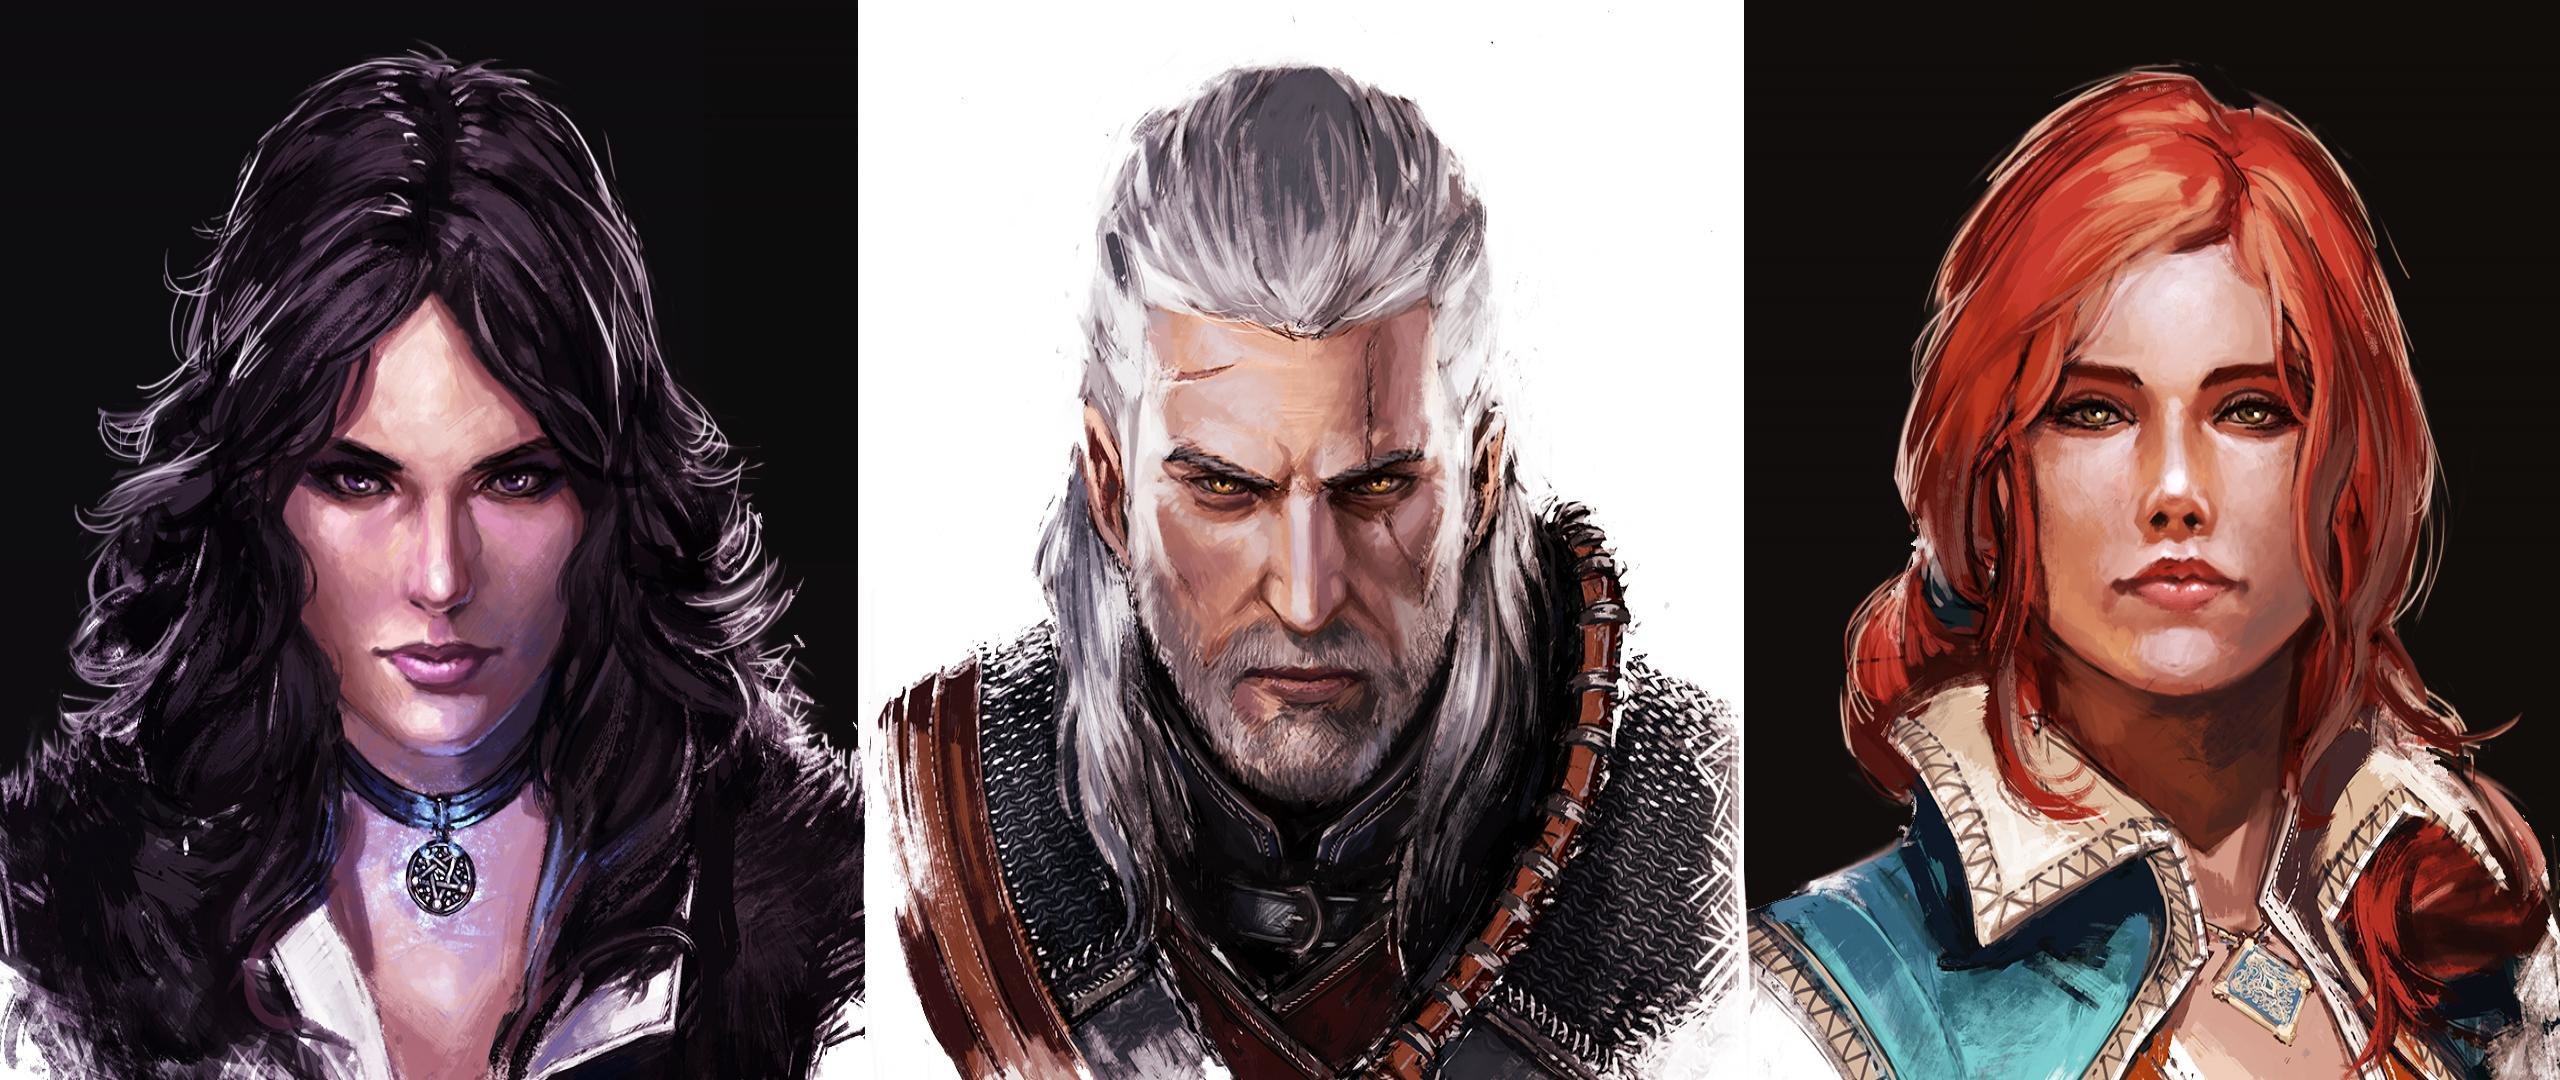 Download hd 2560x1080 The Witcher 3: Wild Hunt desktop background ID:17912 for free